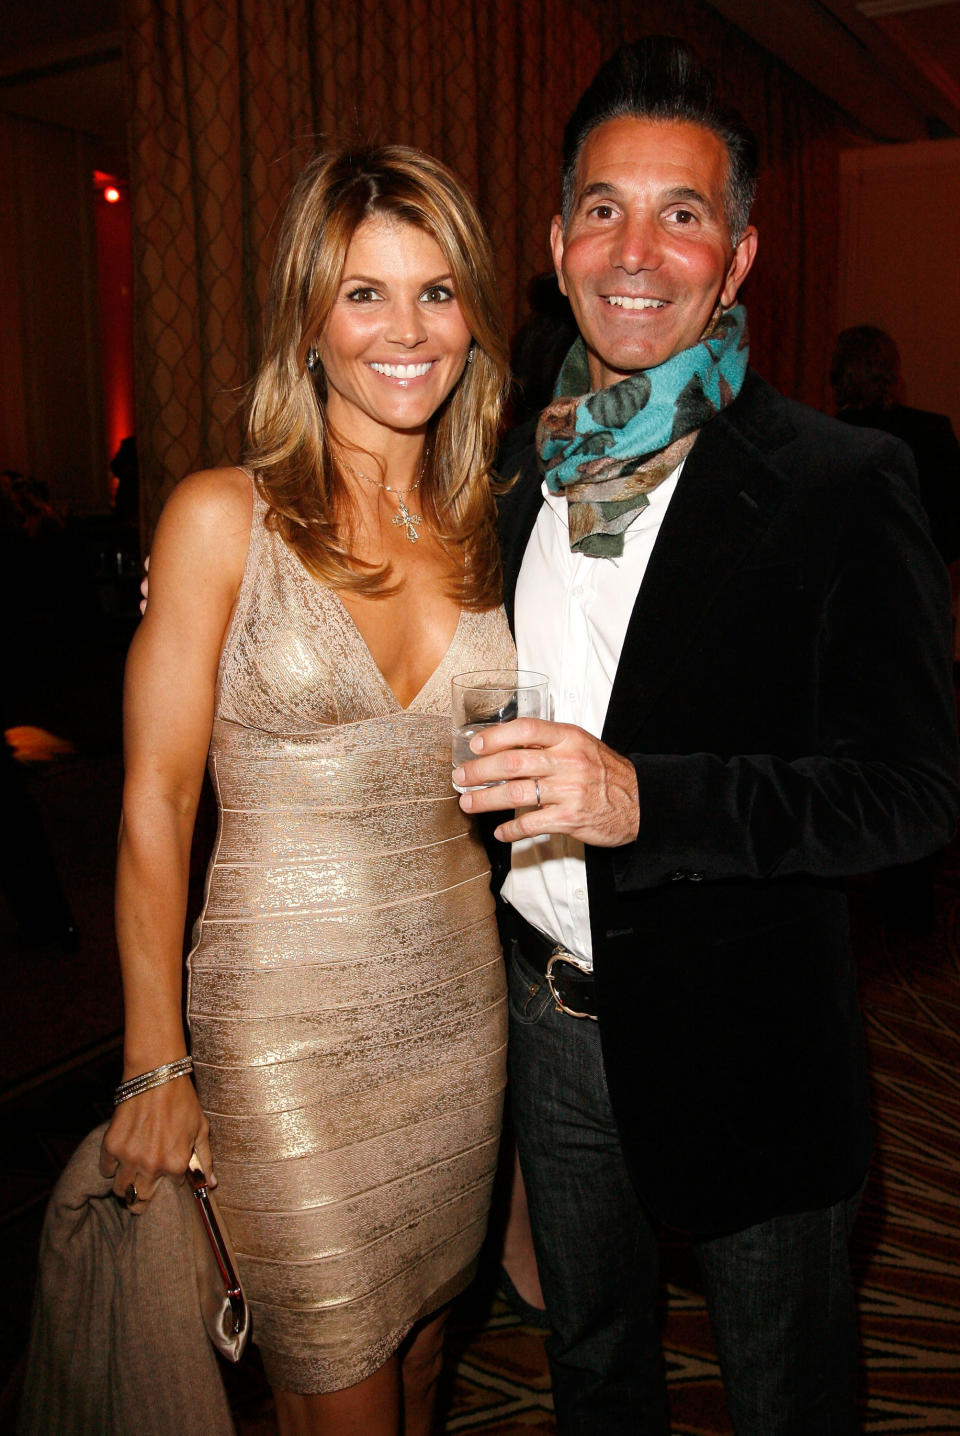 BEVERLY HILLS, CA - FEBRUARY 20:  Actress Lori Loughlin (L) and husband Mossimo Giannulli attend the Saks Fifth Avenue's Unforgettable Evening cocktail reception benefiting Entertainment Industry Foundation's (EIF) Women's Cancer Research Fund held at the Beverly Wishire Hotel on February 20, 2008 in Beverly Hills, California.  (Photo by Donato Sardella/WireImage) 